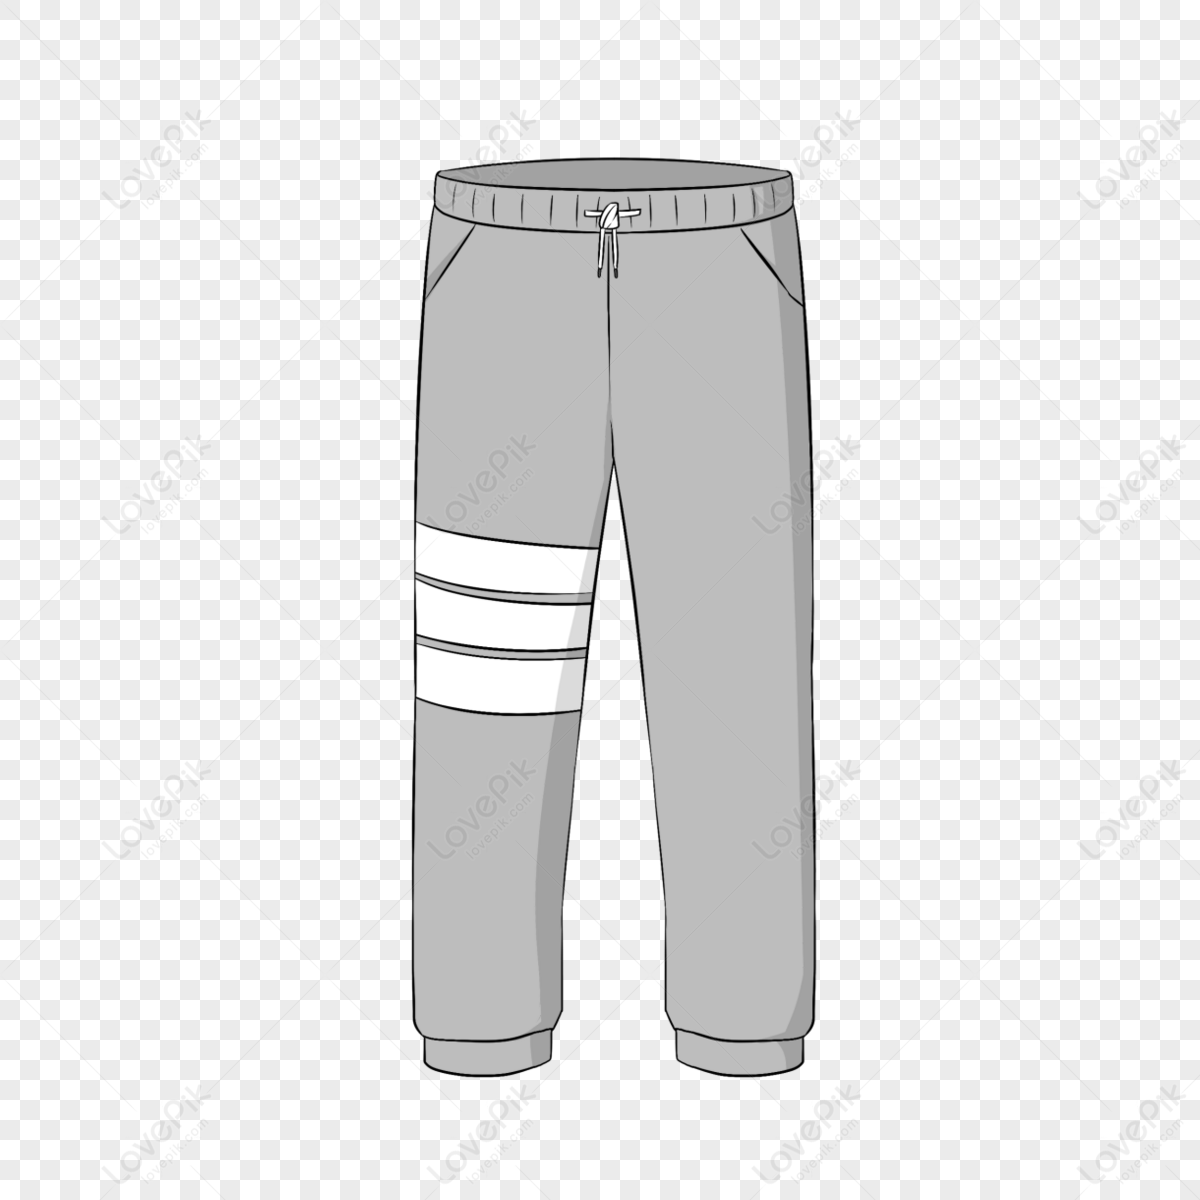 Sports Jogger Bottom Pants Design Vector Template Track Pants Concept With  Front And Back View Sweatpants For Running Jogging Fitness And Active Wear  Pants Design Stock Illustration - Download Image Now - iStock